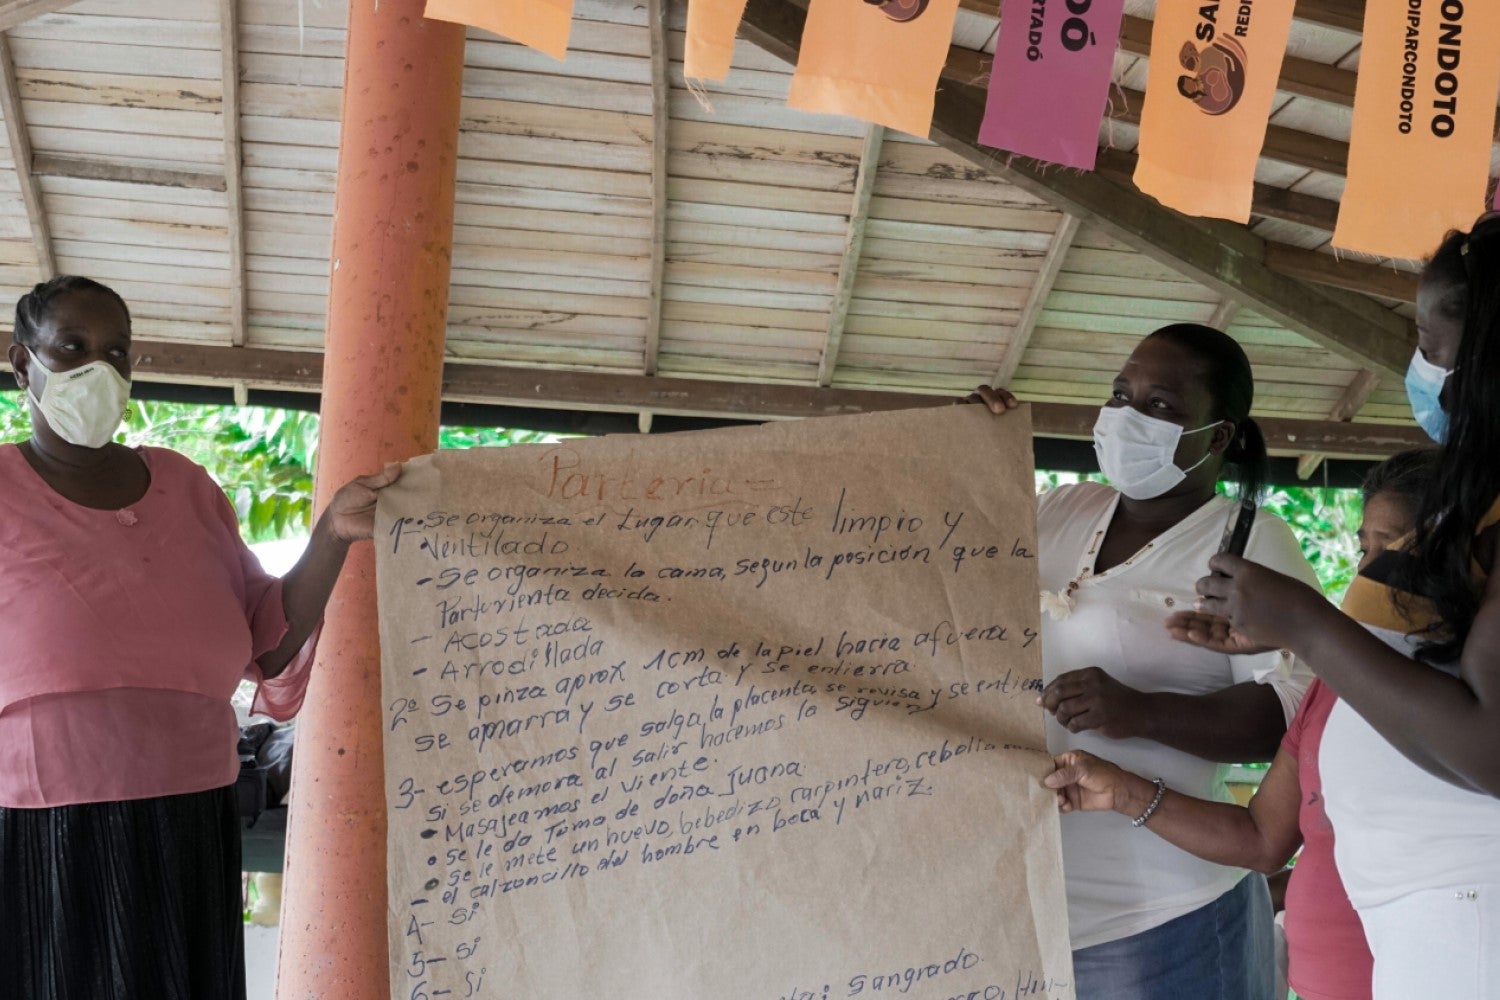 Knowledge-sharing session with traditional birth attendants from Chocó, Colombia.